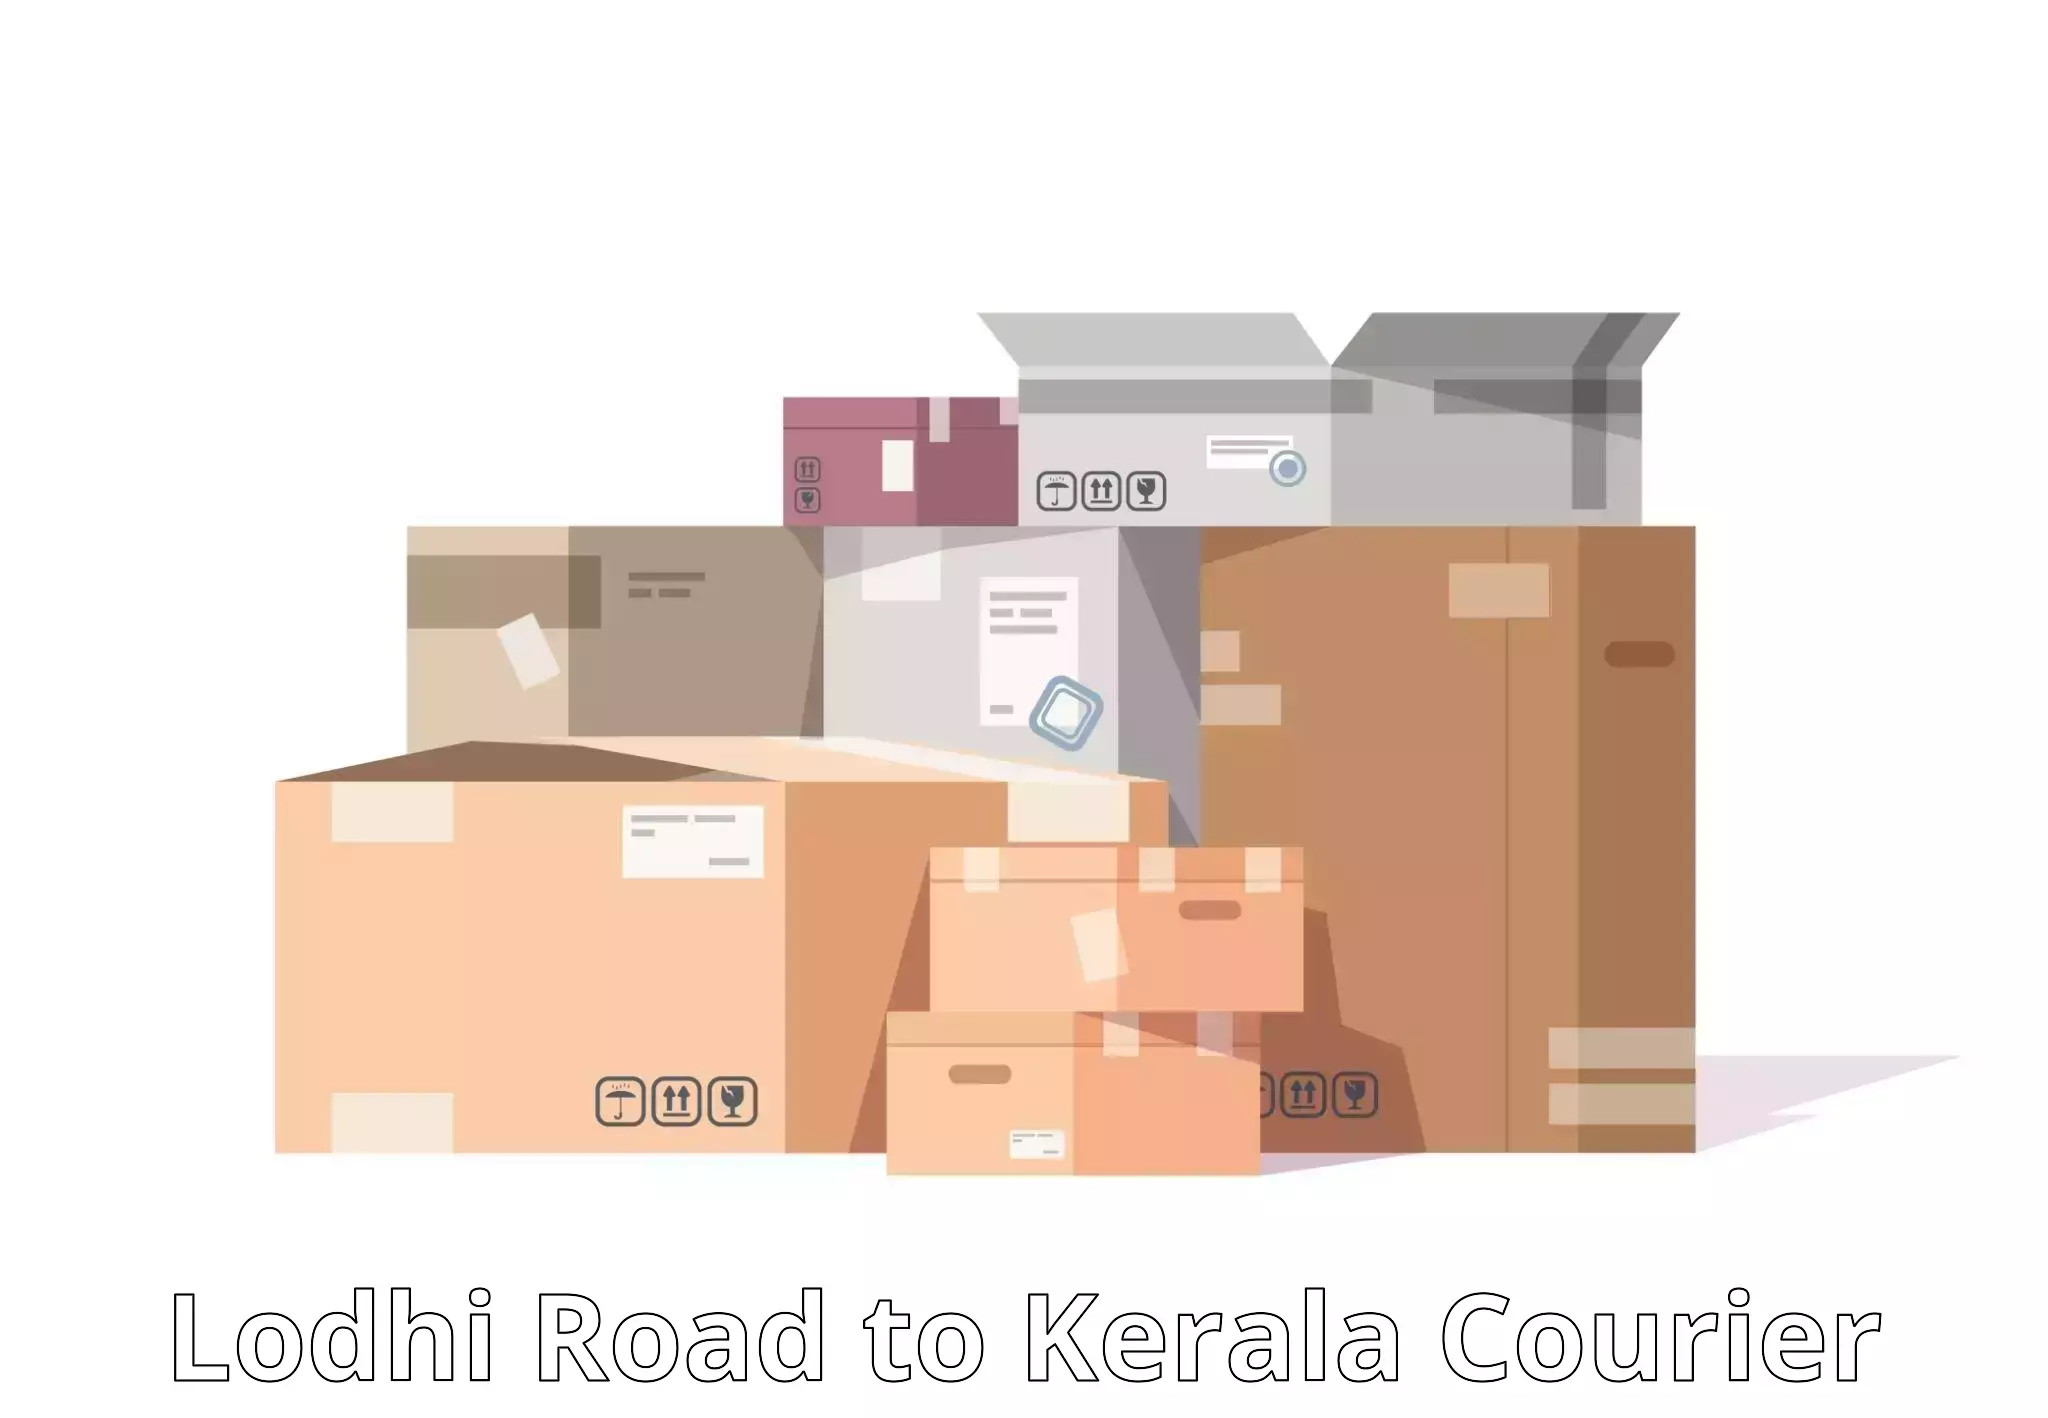 Supply chain efficiency Lodhi Road to Kozhikode